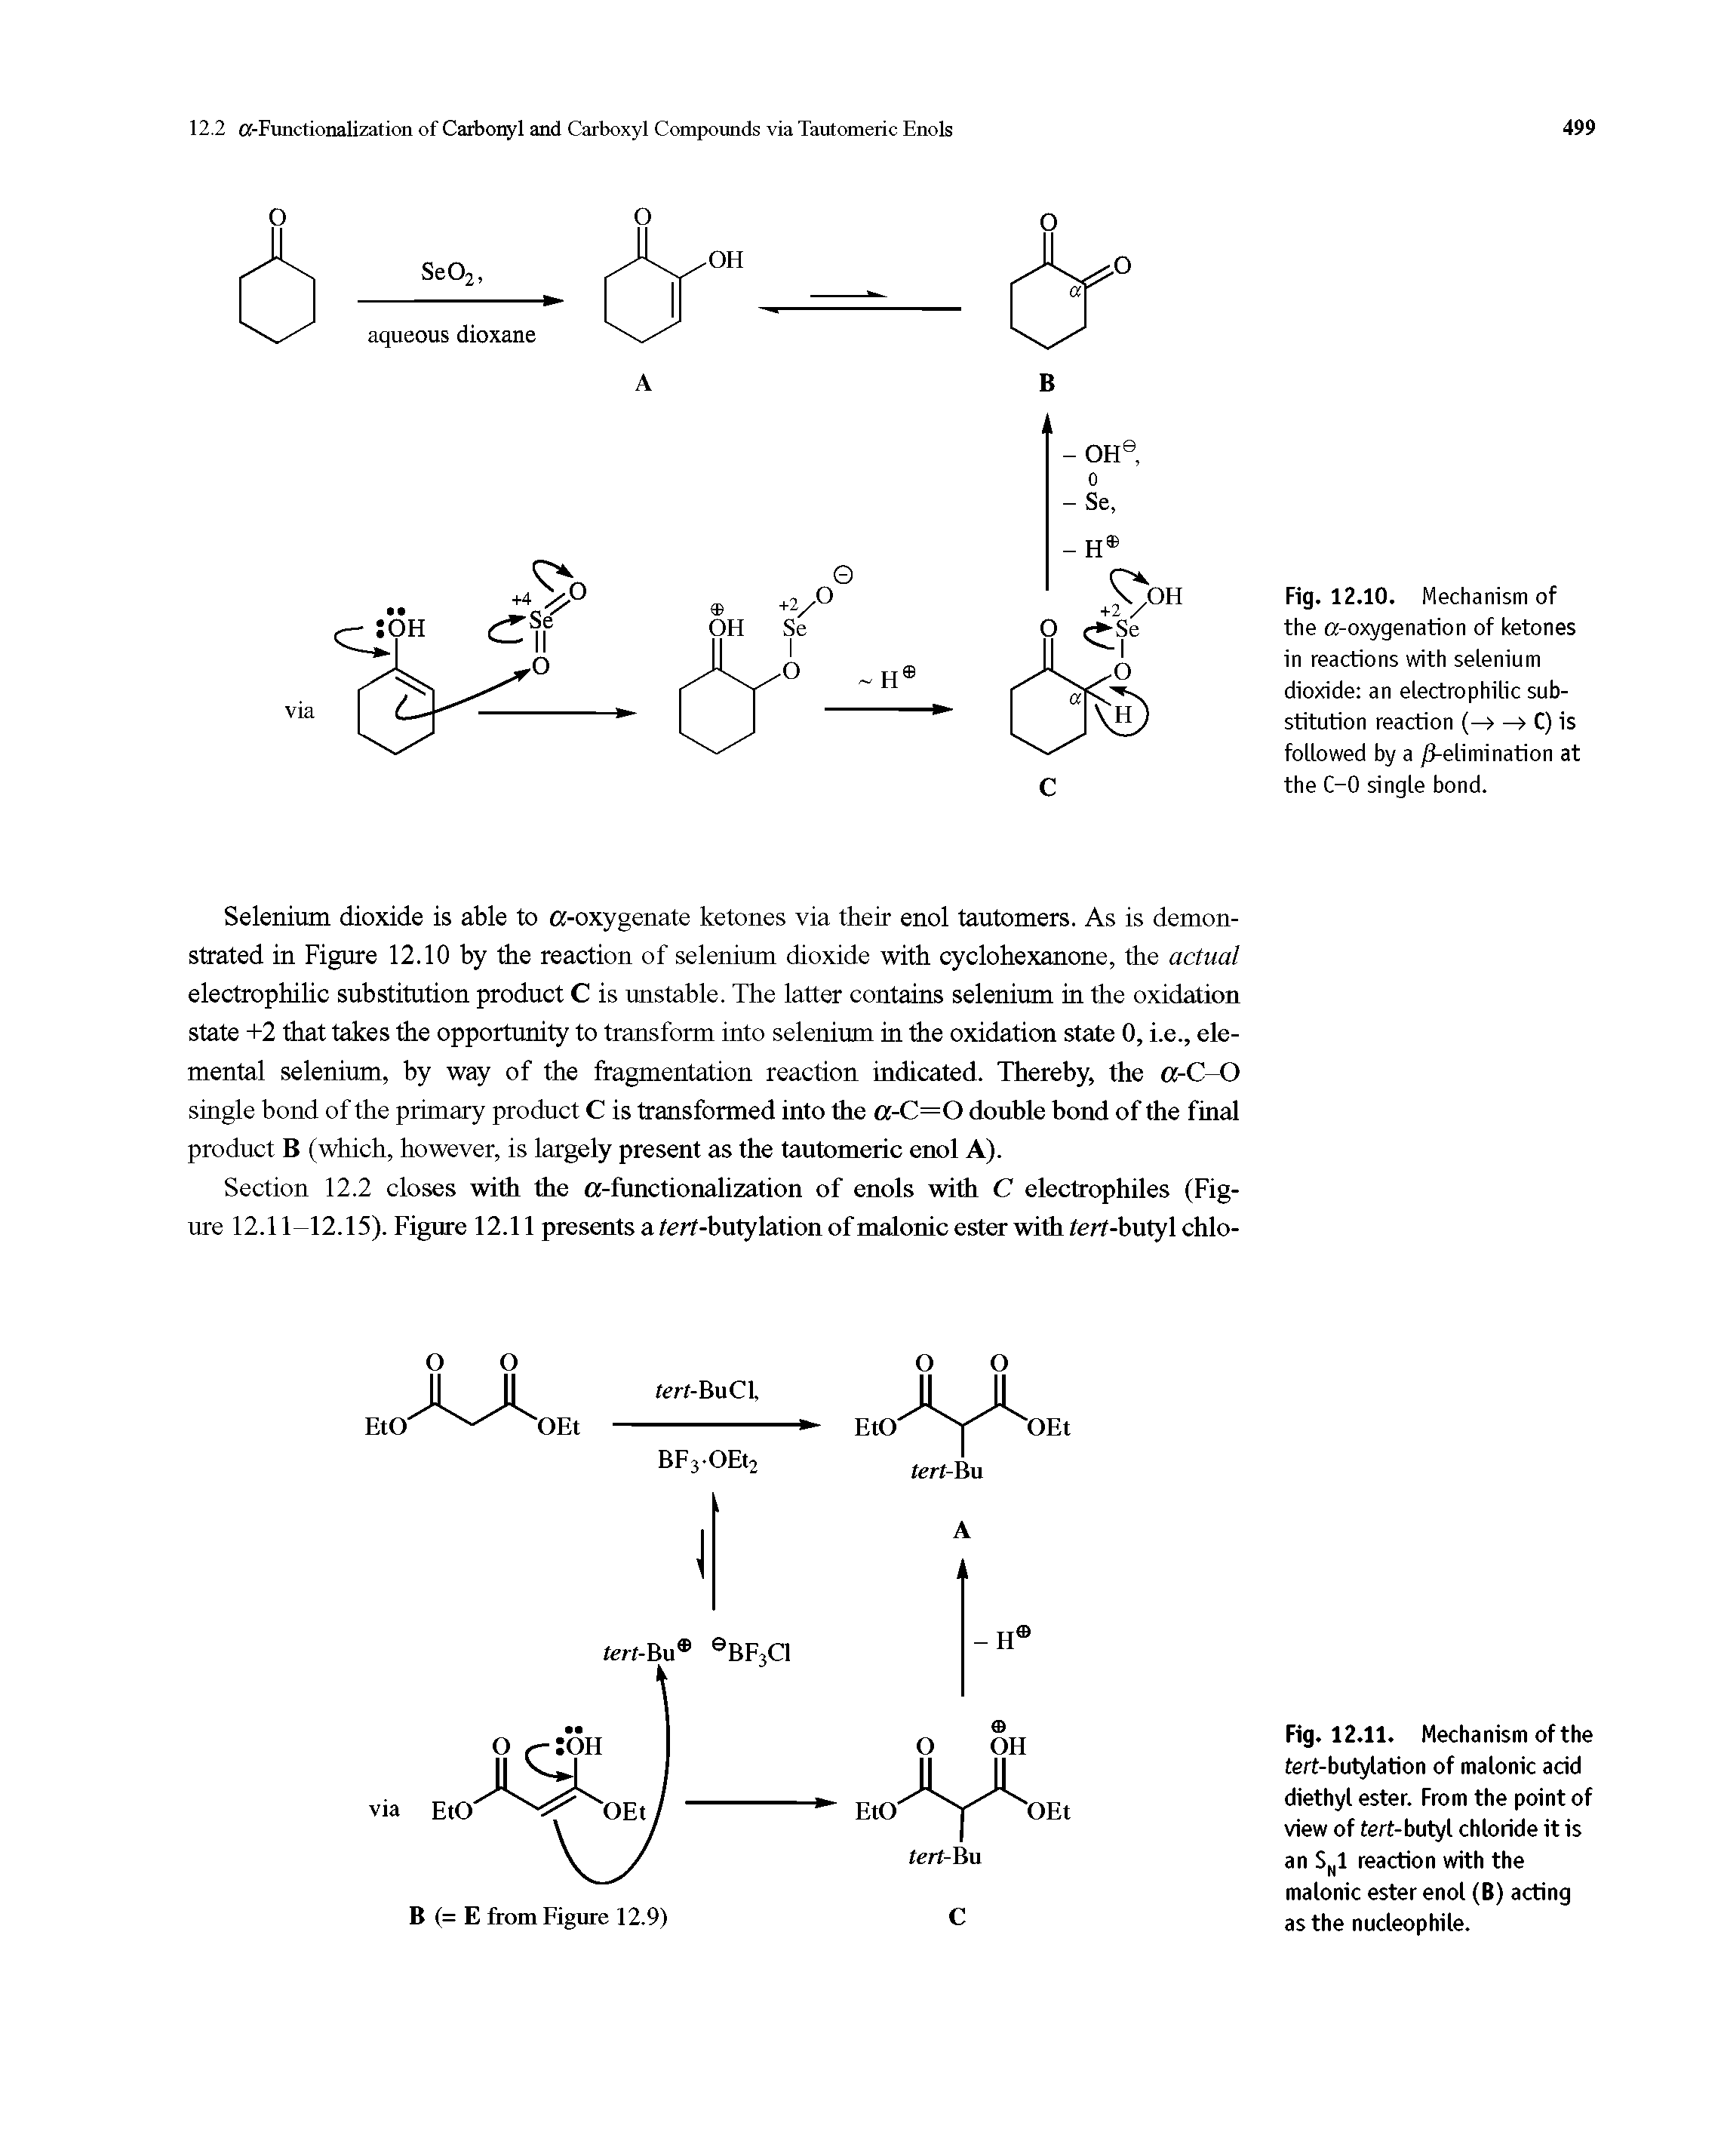 Fig. 12.11. Mechanism of the tert-butylation of malonic acid diethyl ester. From the point of view of tert-butyl chloride it is an SN1 reaction with the malonic ester enol (B) acting as the nucleophile.